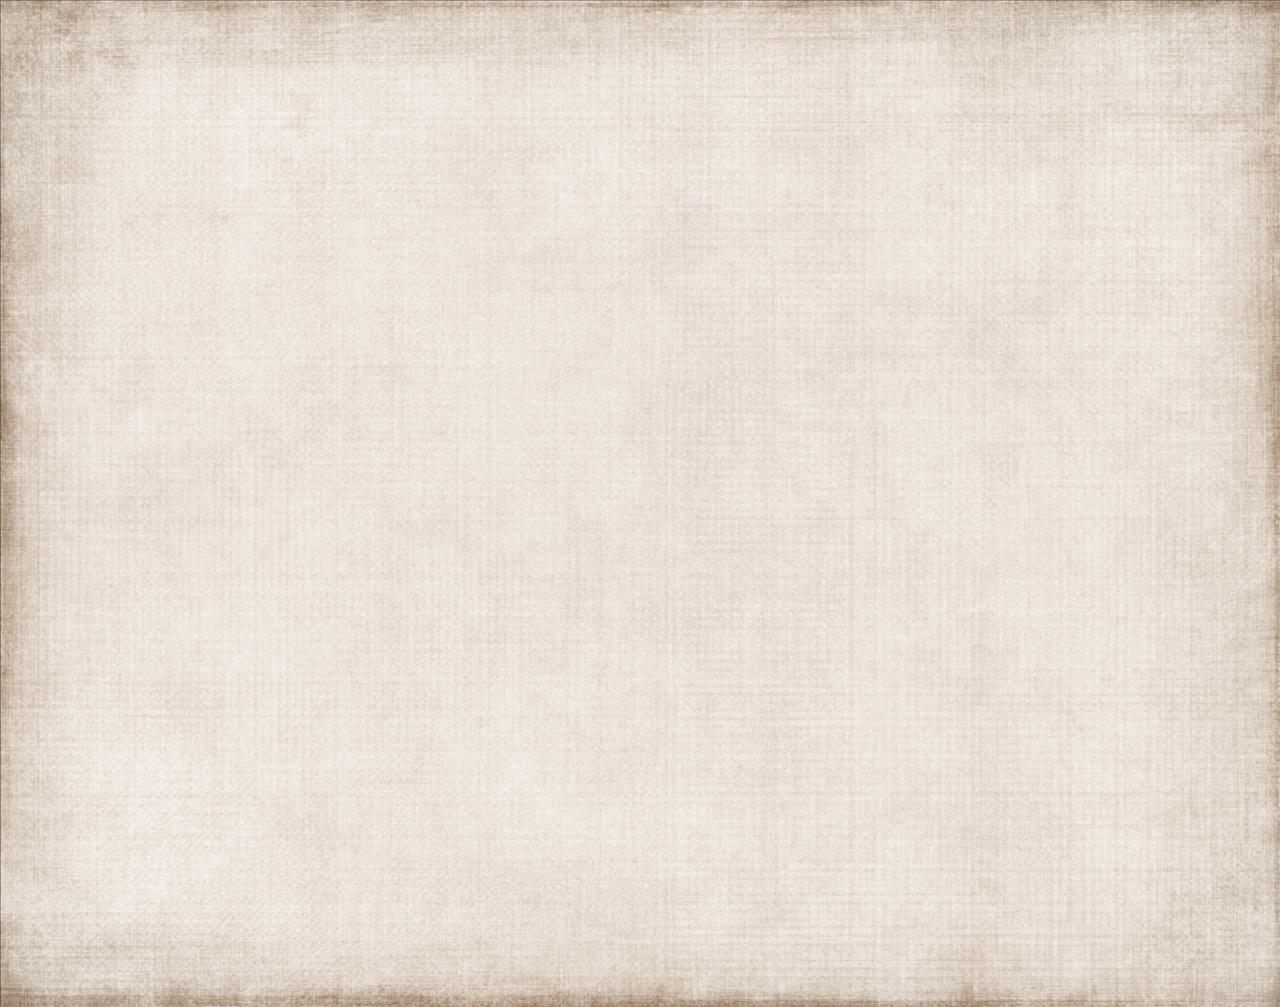 Weathered Paper Backgrounds